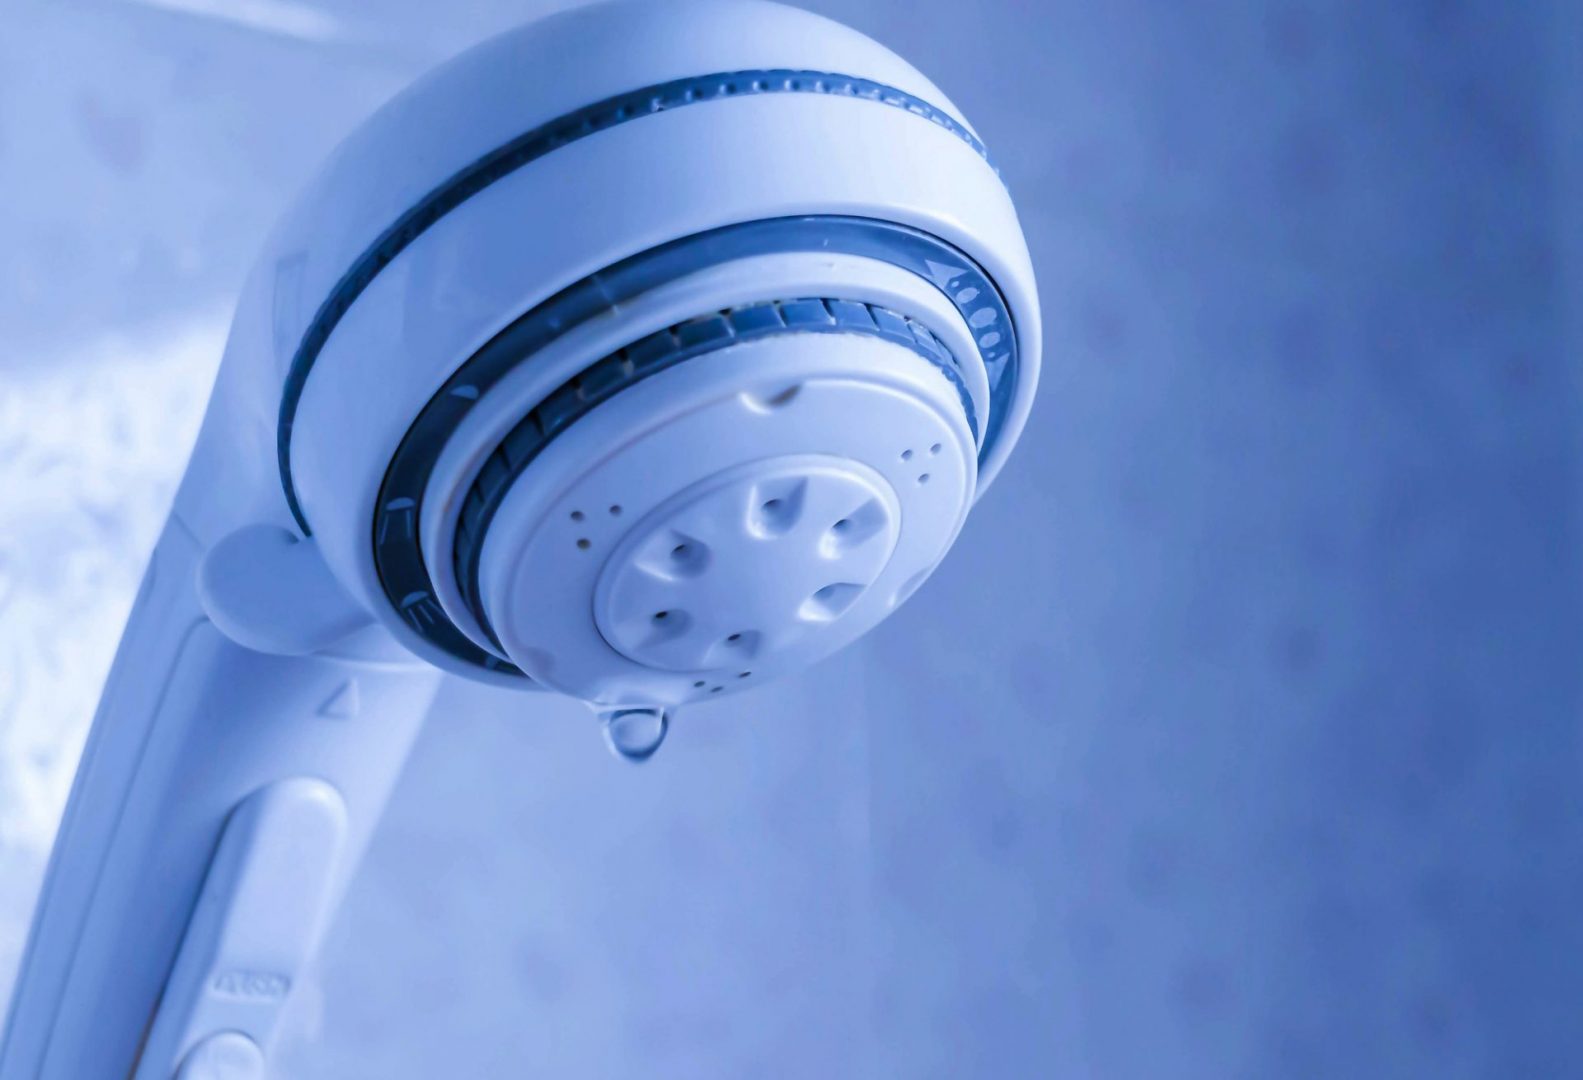 water pressure issues are very common within residential plumbing systems, including with showerheads